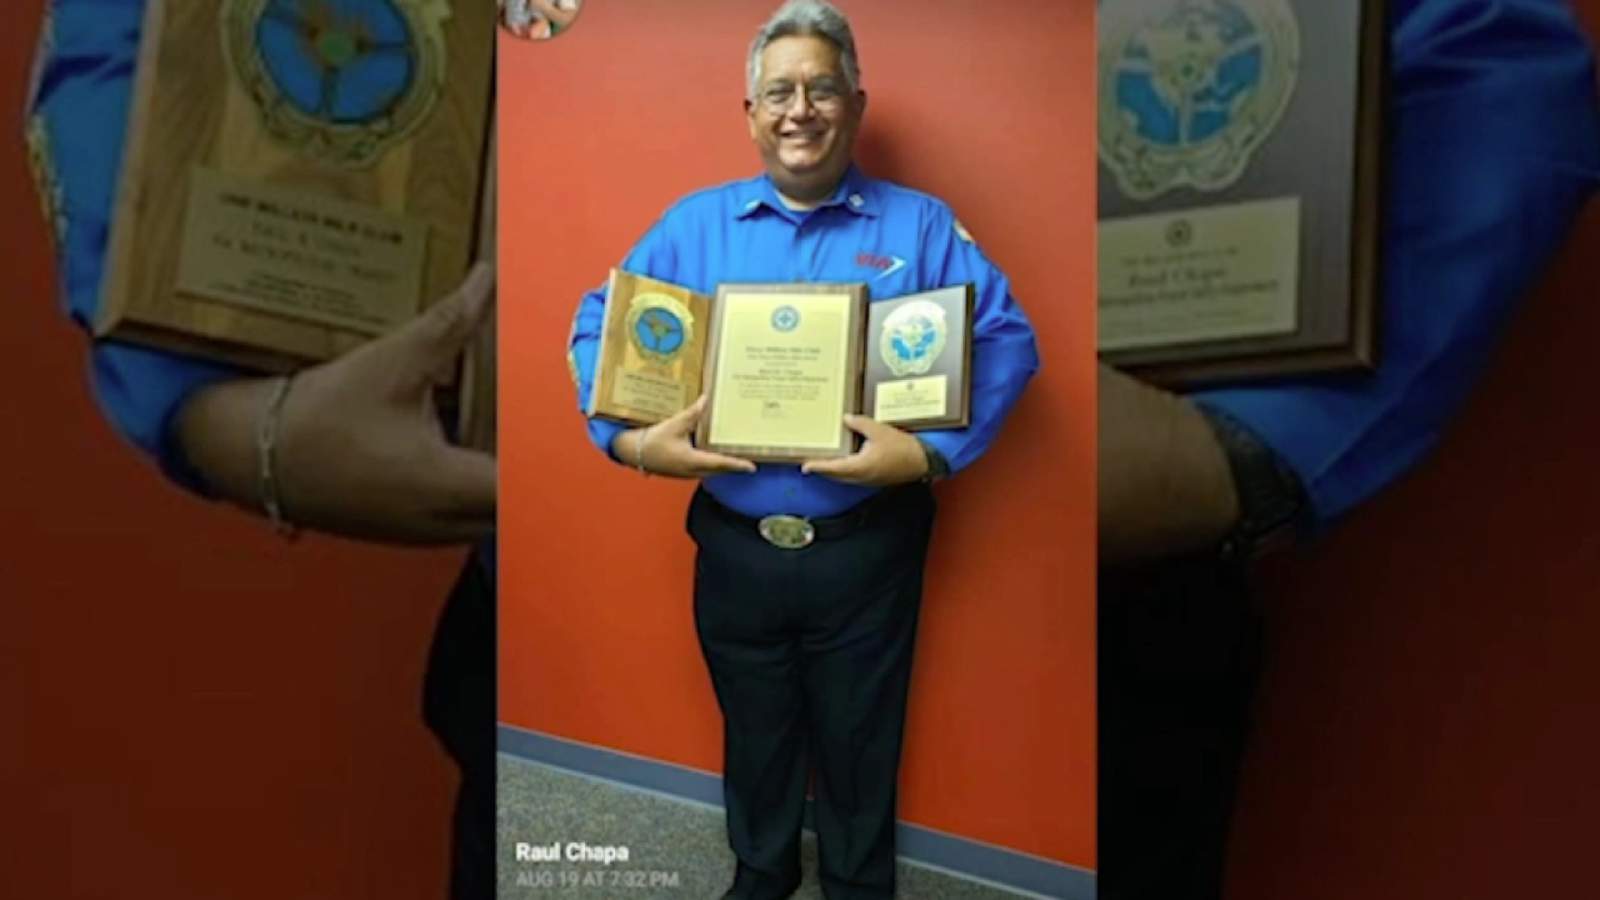 VIA bus operator retires after 41 years, 3 million miles with perfect driving record